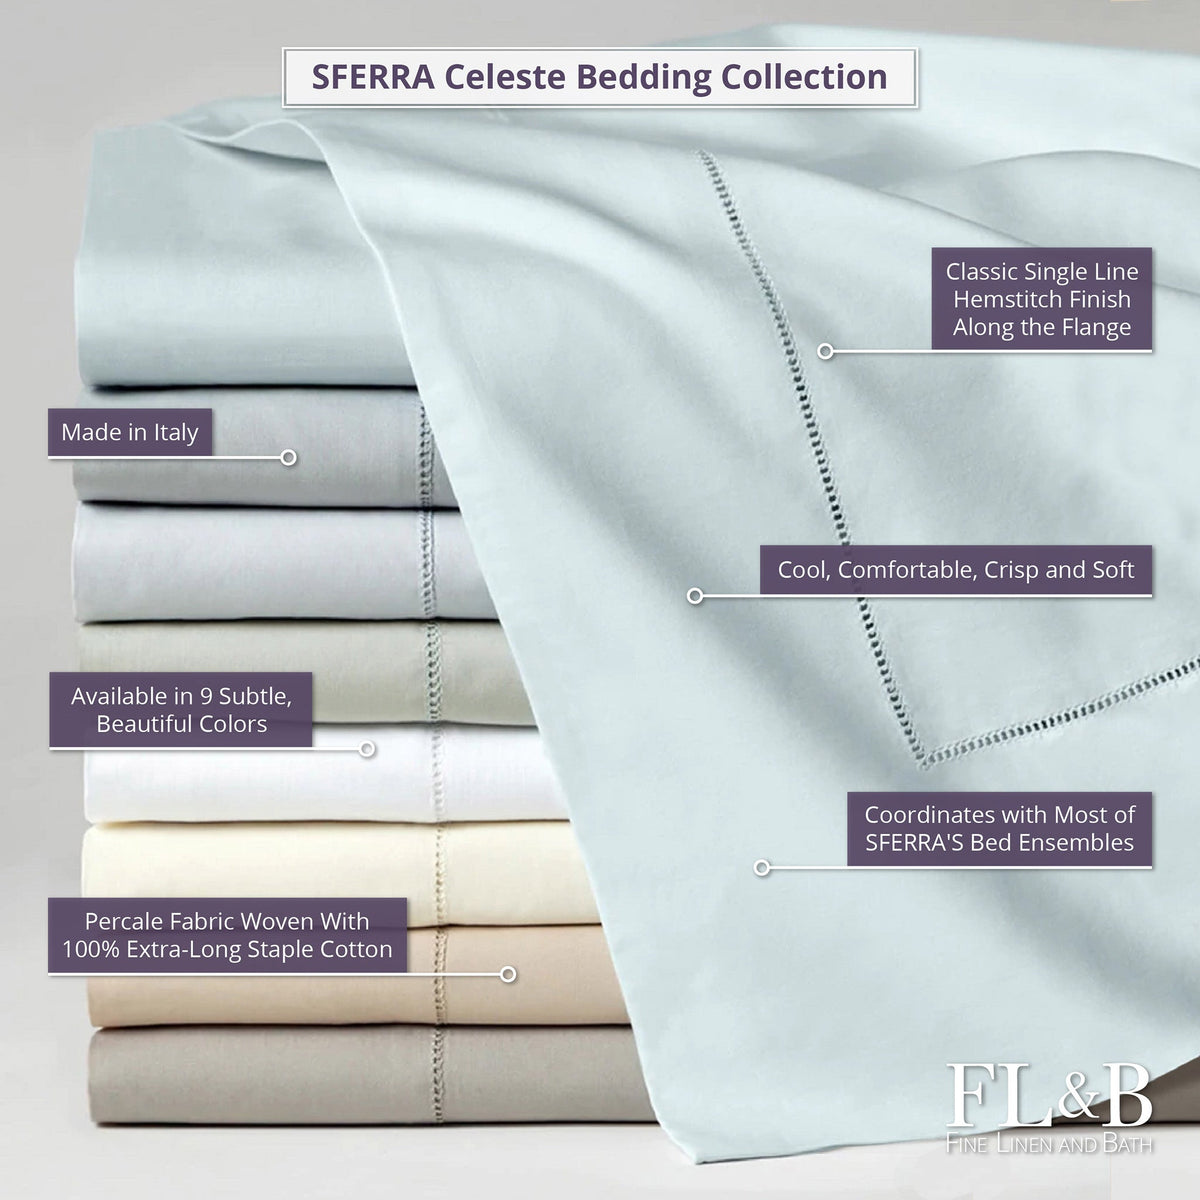 Sferra Celeste Bedding Sheets Folded and Stacked Assorted Colors with Descriptive Labels